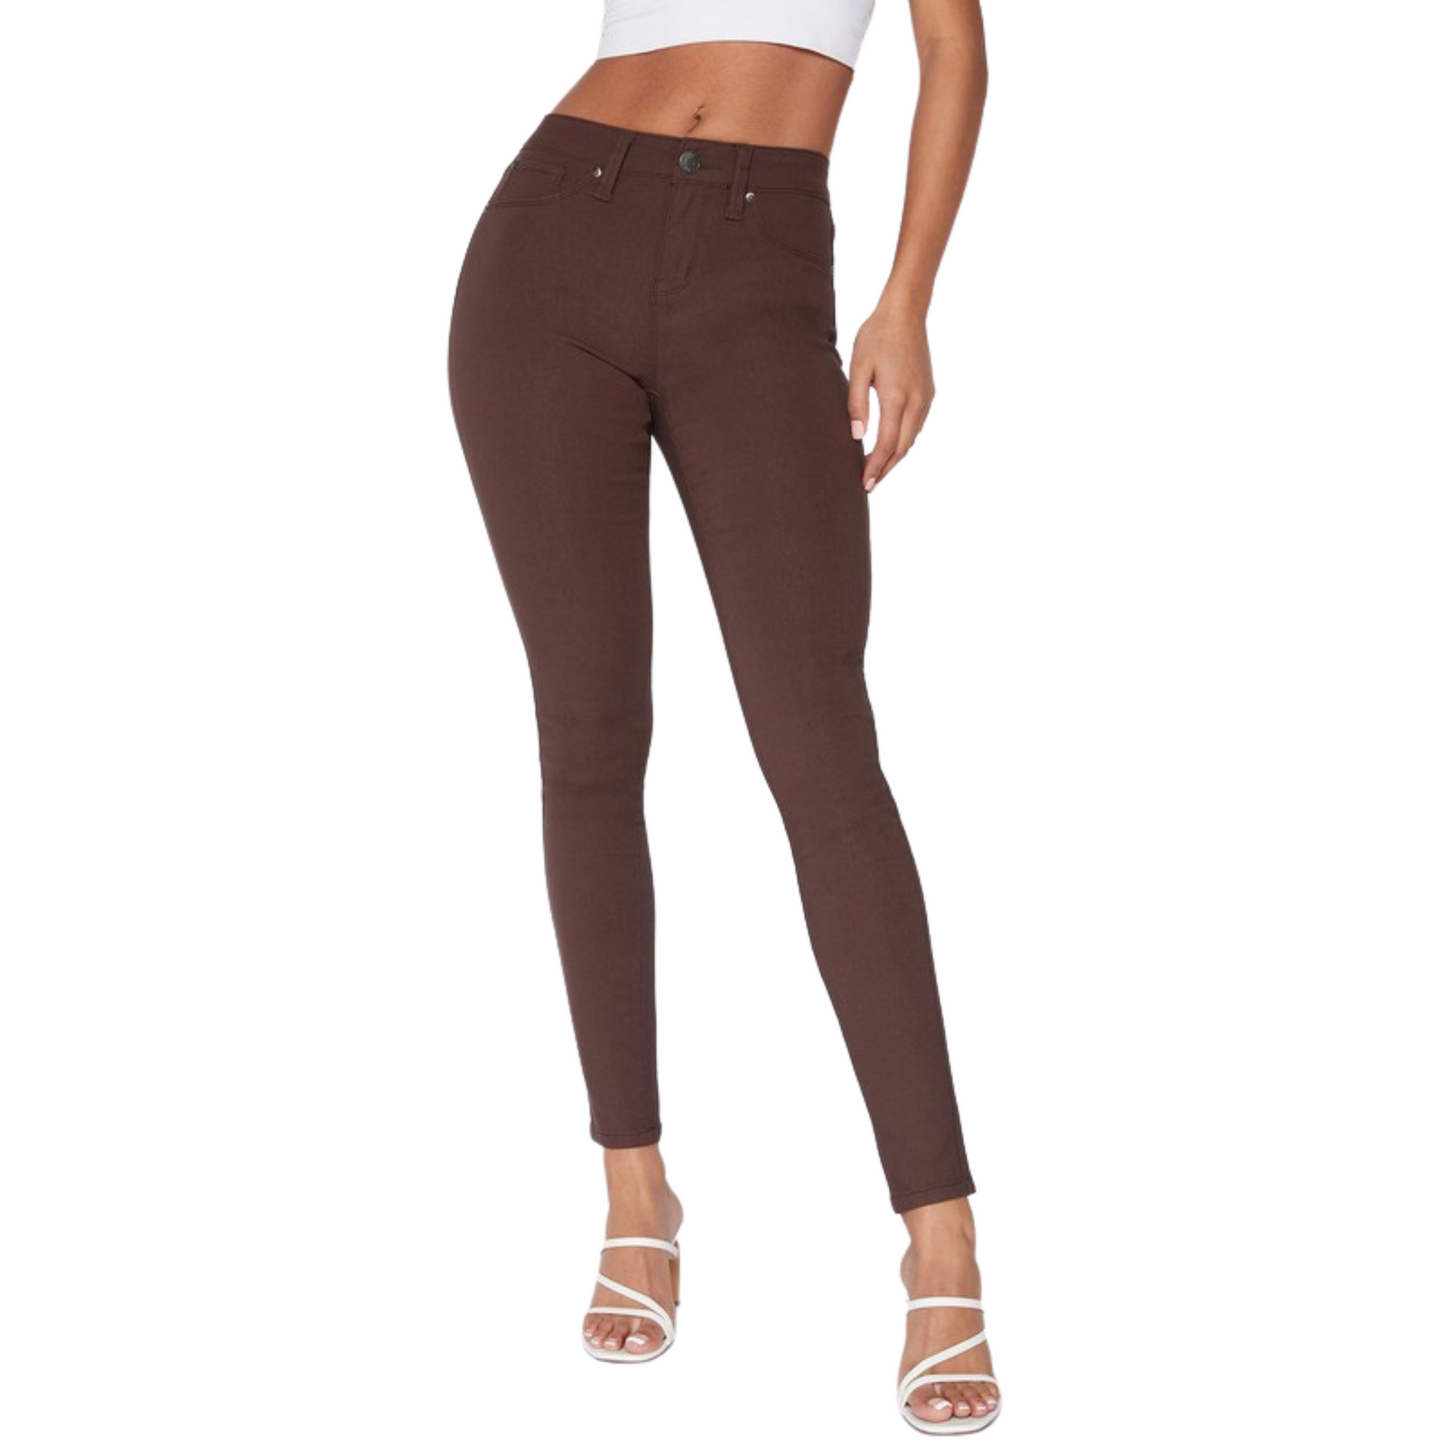 Our Hyper stretch Mid Rise Skinny Jeans are made from a super-stretchy fabric, allowing you the perfect fit without ever compromising your comfort. With a variety of colors available, these jeans provide a stylish and versatile option for your wardrobe. The mid-rise waist gives you a comfortable, flattering fit.